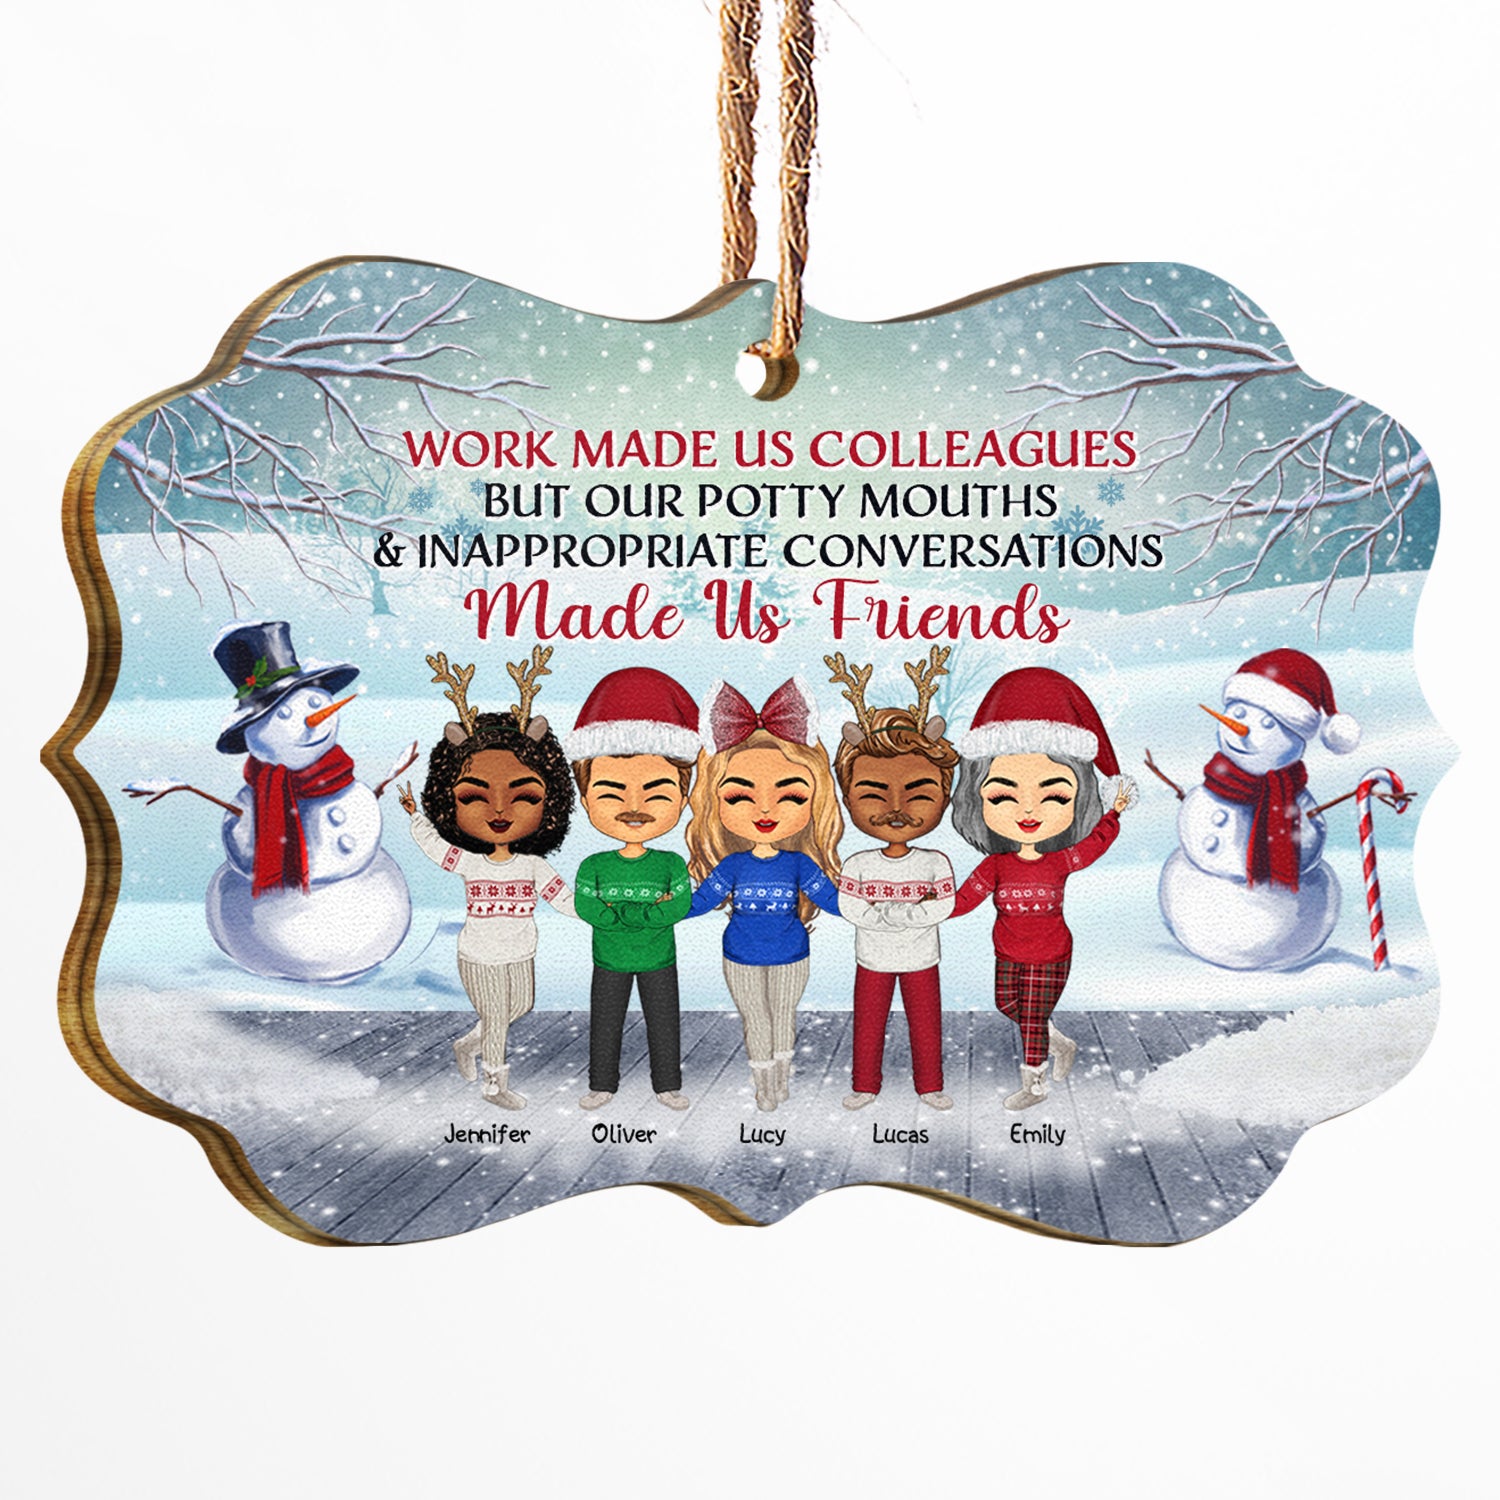 Work Made Us Colleagues - Christmas Gift For Co-worker - Personalized Wooden Ornament